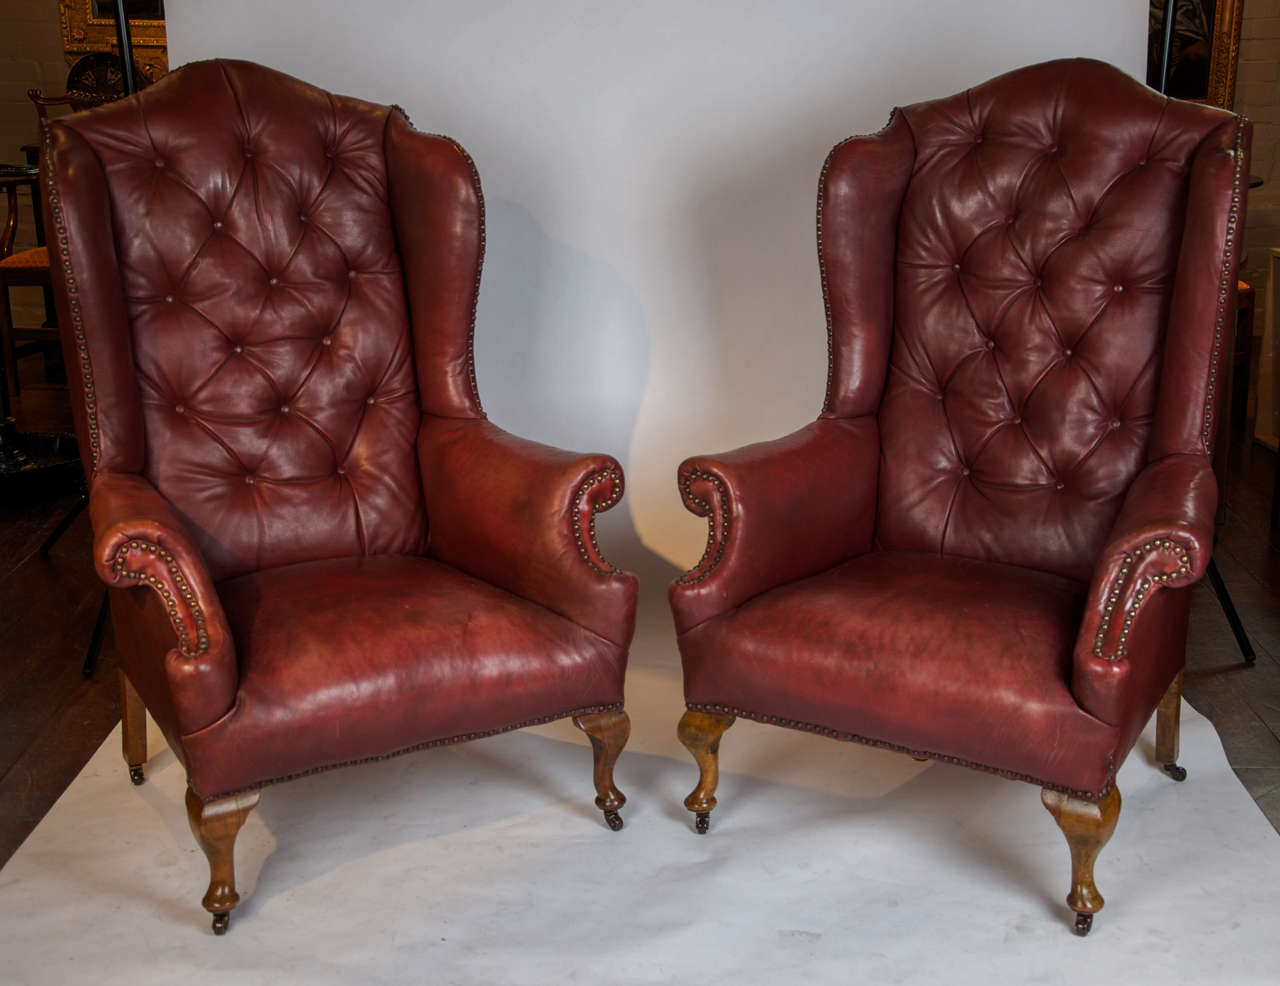 Pair Of Early 20th Century Red Leather Wing Back Chairs At 1stdibs